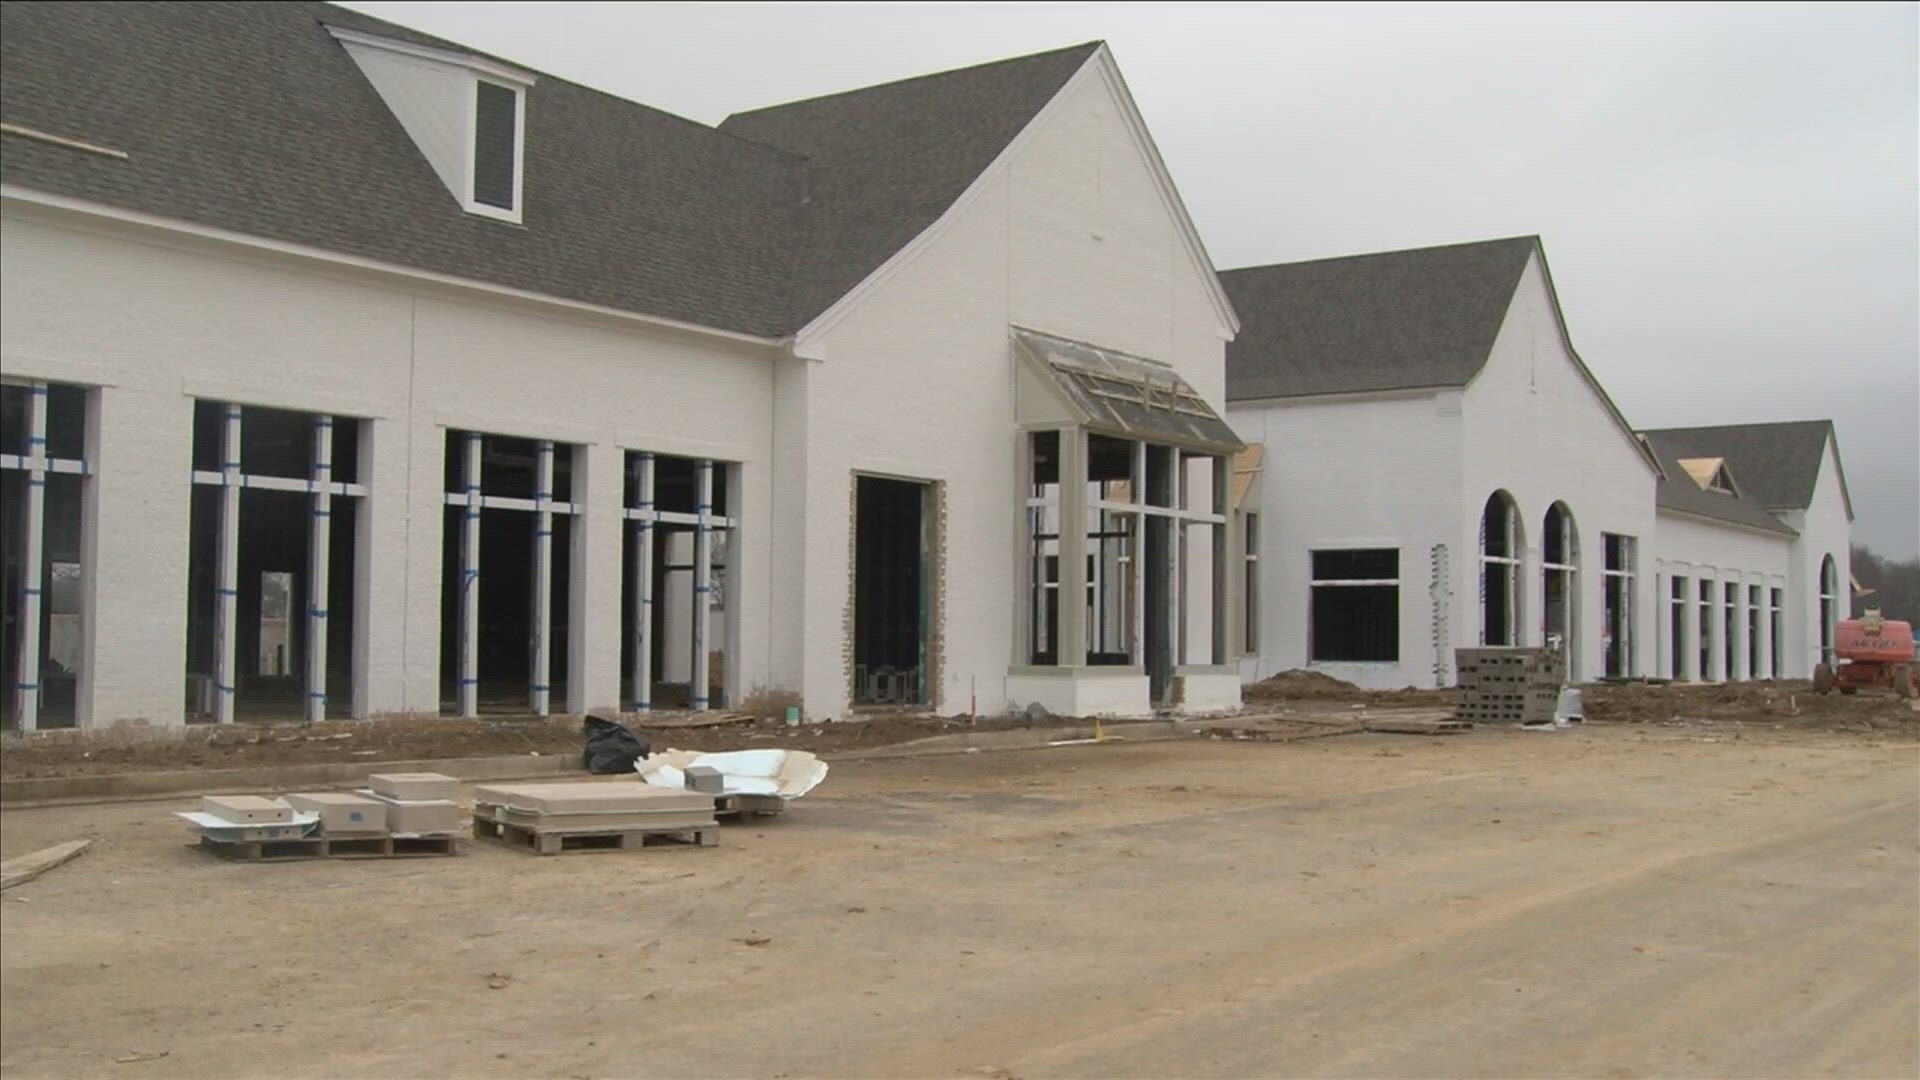 The town of Collierville is growing, and it's attracting new businesses to the area.